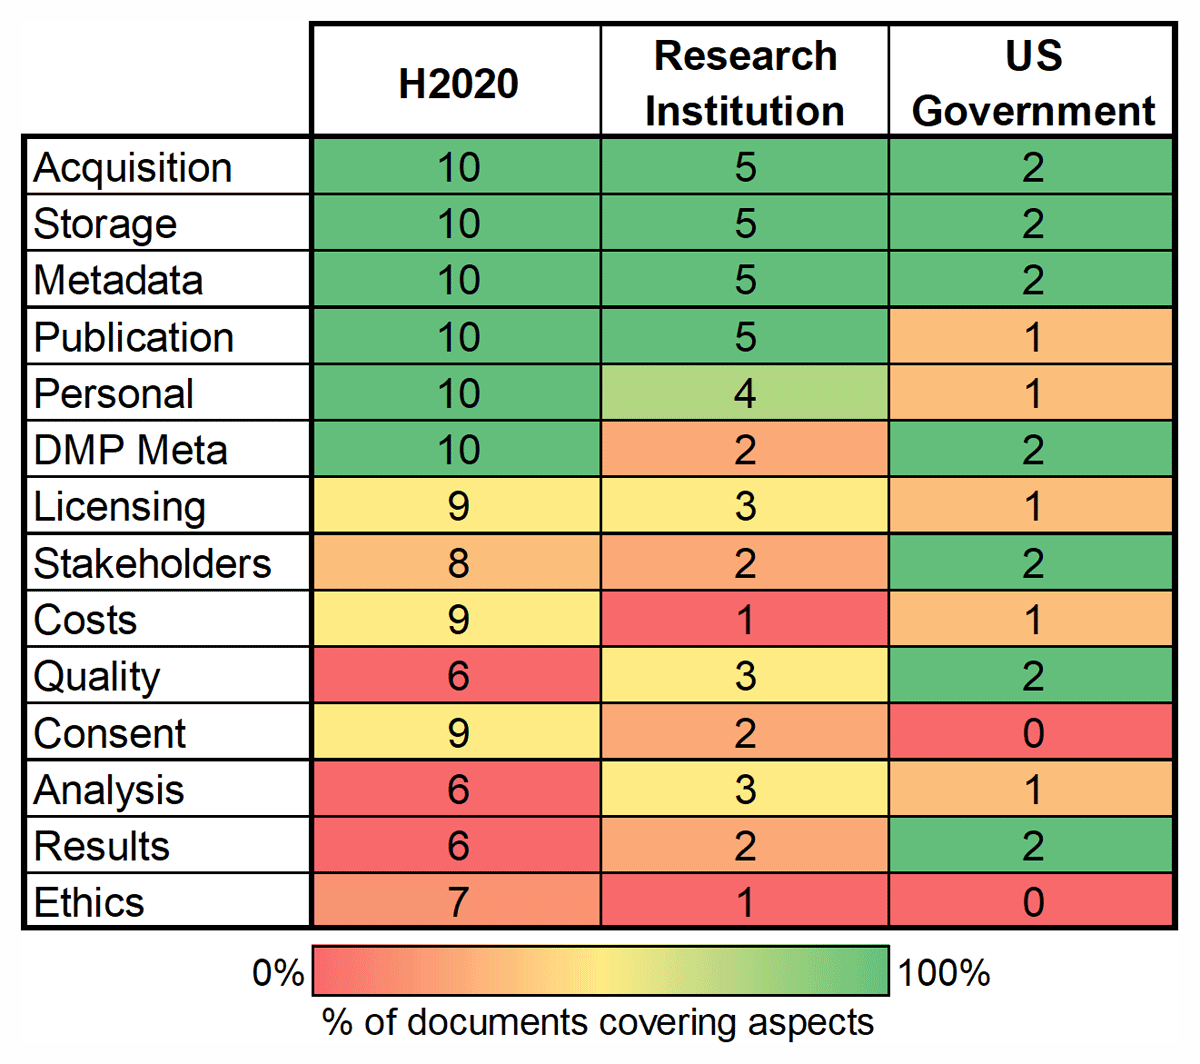 Heatmap of elements covered in data management plans by funders, showing "H2020", "Research Institution" and "US Government" along the top, and along the left the categories: Acquisition, Storage, Metadata, Publication, Personal, DMP Meta, Licensing, Stakeholders, Costs, Quality, Consent, Analysis, Results, Ethics. The legent shows that green means 100% of documents covered this aspct, while red means 0% did so. The first three are lines green for all funders, and then gradually become yellow/red as the list goes down, with some exceptions for US Government, which remains green for DMP Meta, Stakeholders, Quality, and Results